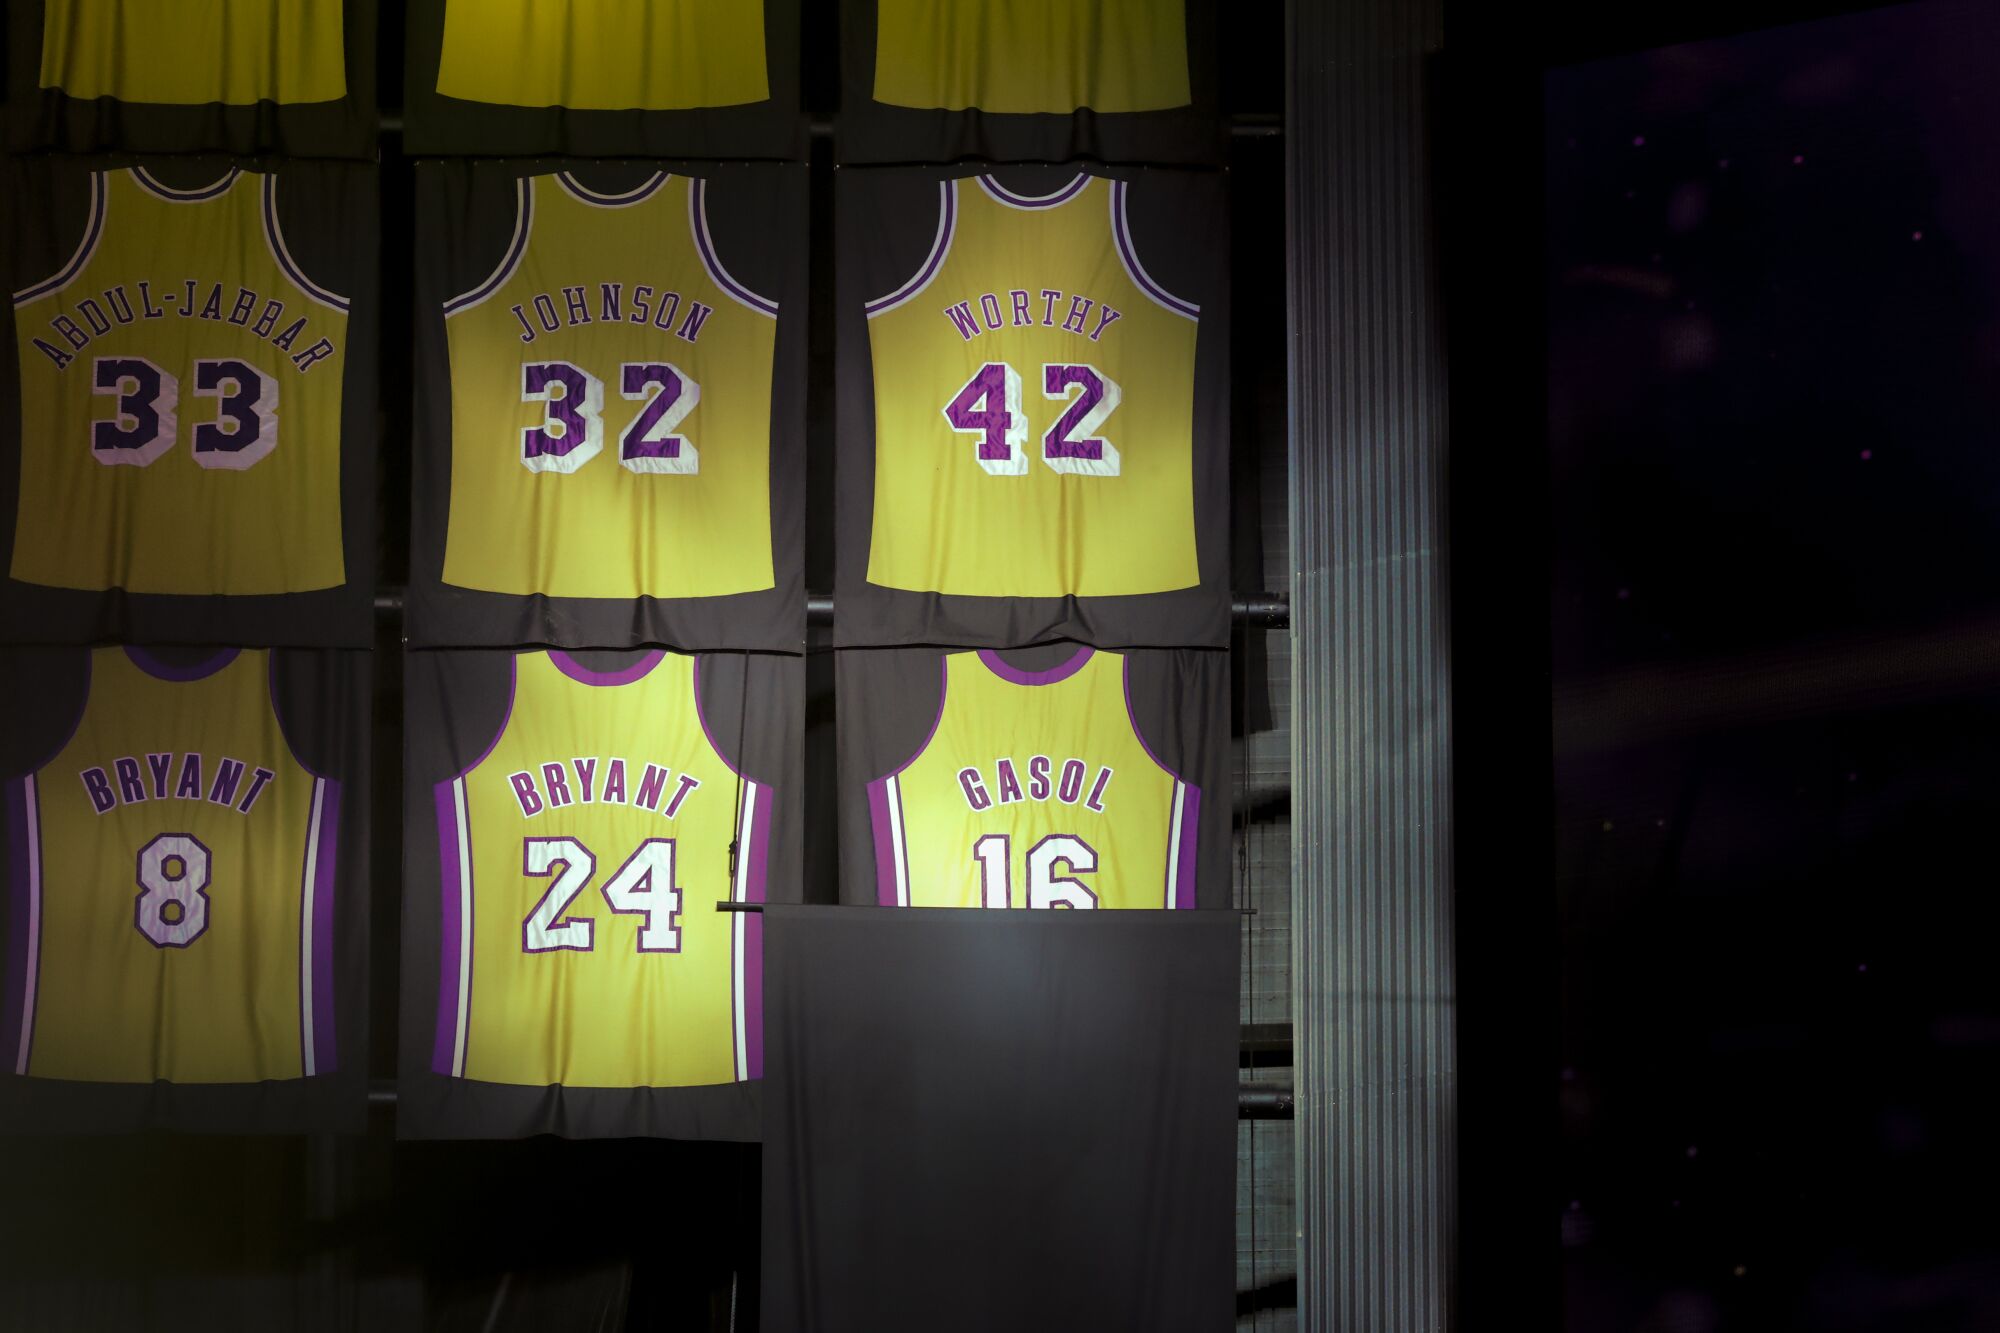 The retired jersey of former Lakers star Pau Gasol is revealed during a halftime ceremony Tuesday.